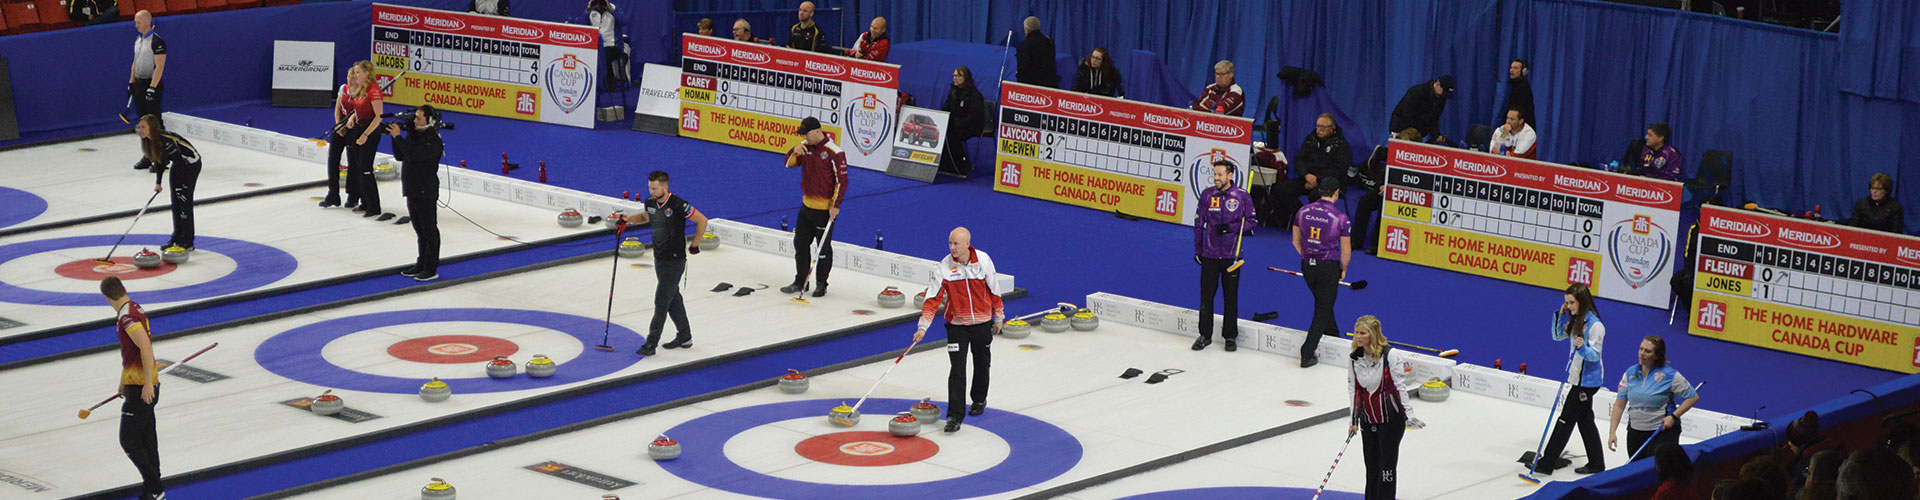 Teams compete in Canada Cup curling at the Keystone Centre in Brandon, Manitoba